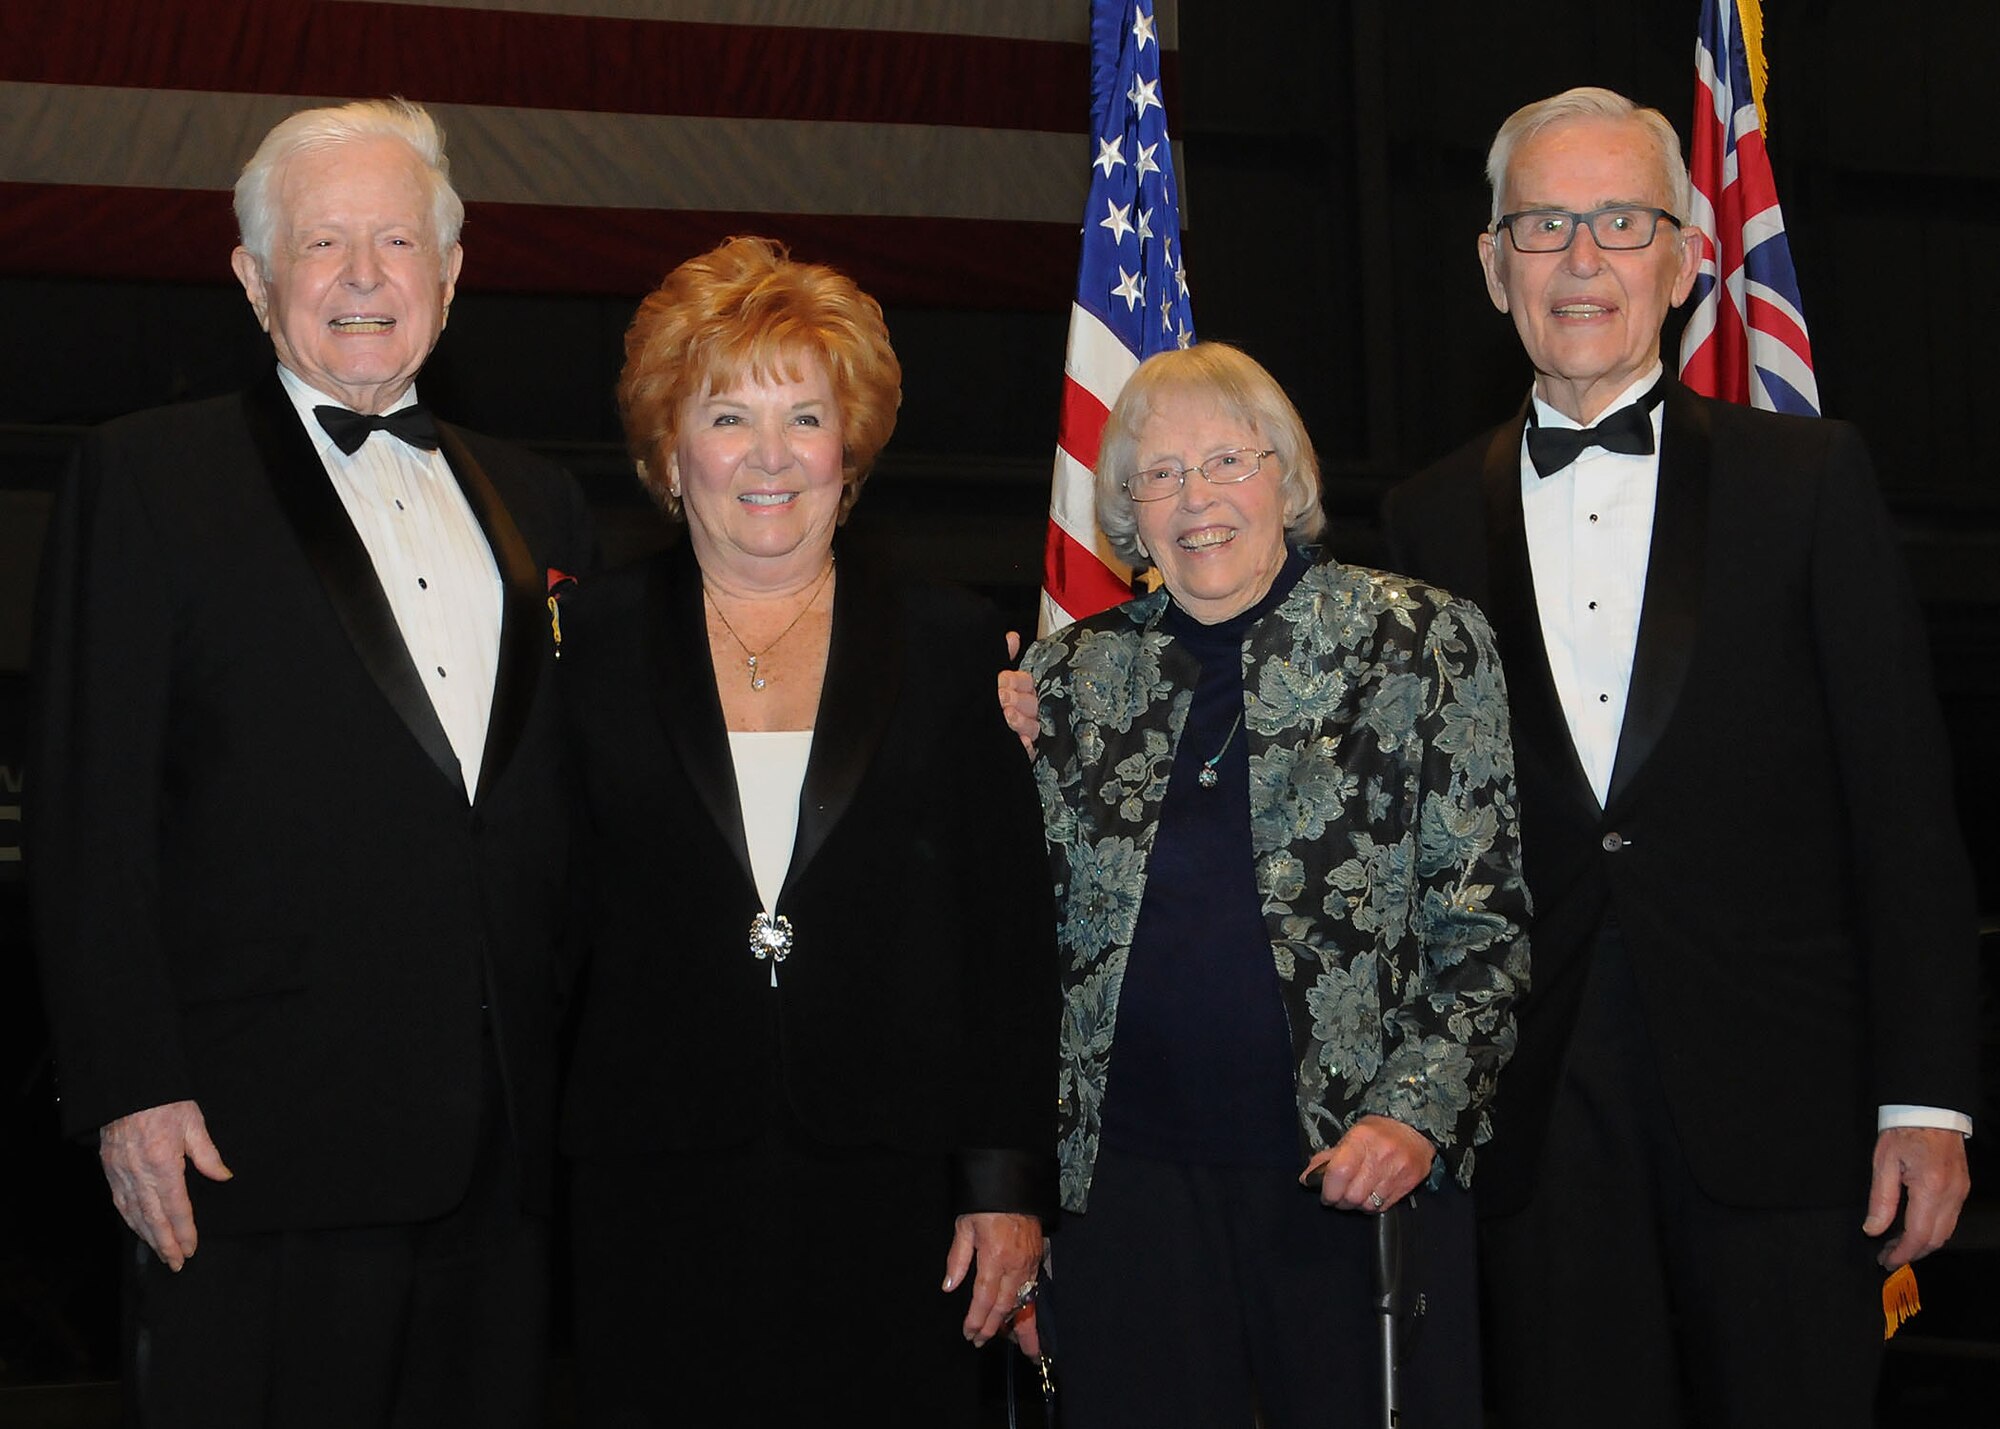 WRIGHT-PATTERSON AIR FORCE BASE, Ohio – From left to right, Victor Bilek, Marion Holzfaster, Fran Pickerel, and Roy Brown pose for a photo at the National Air and Space Intelligence Center's annual dining out Friday, March 27, 2015. Bilek and Brown both served in support of Operation Luftwaffe Secret Technology (LUSTY). (U.S. Air Force photo by Staff Sgt. Marianne E. Lane/Released)